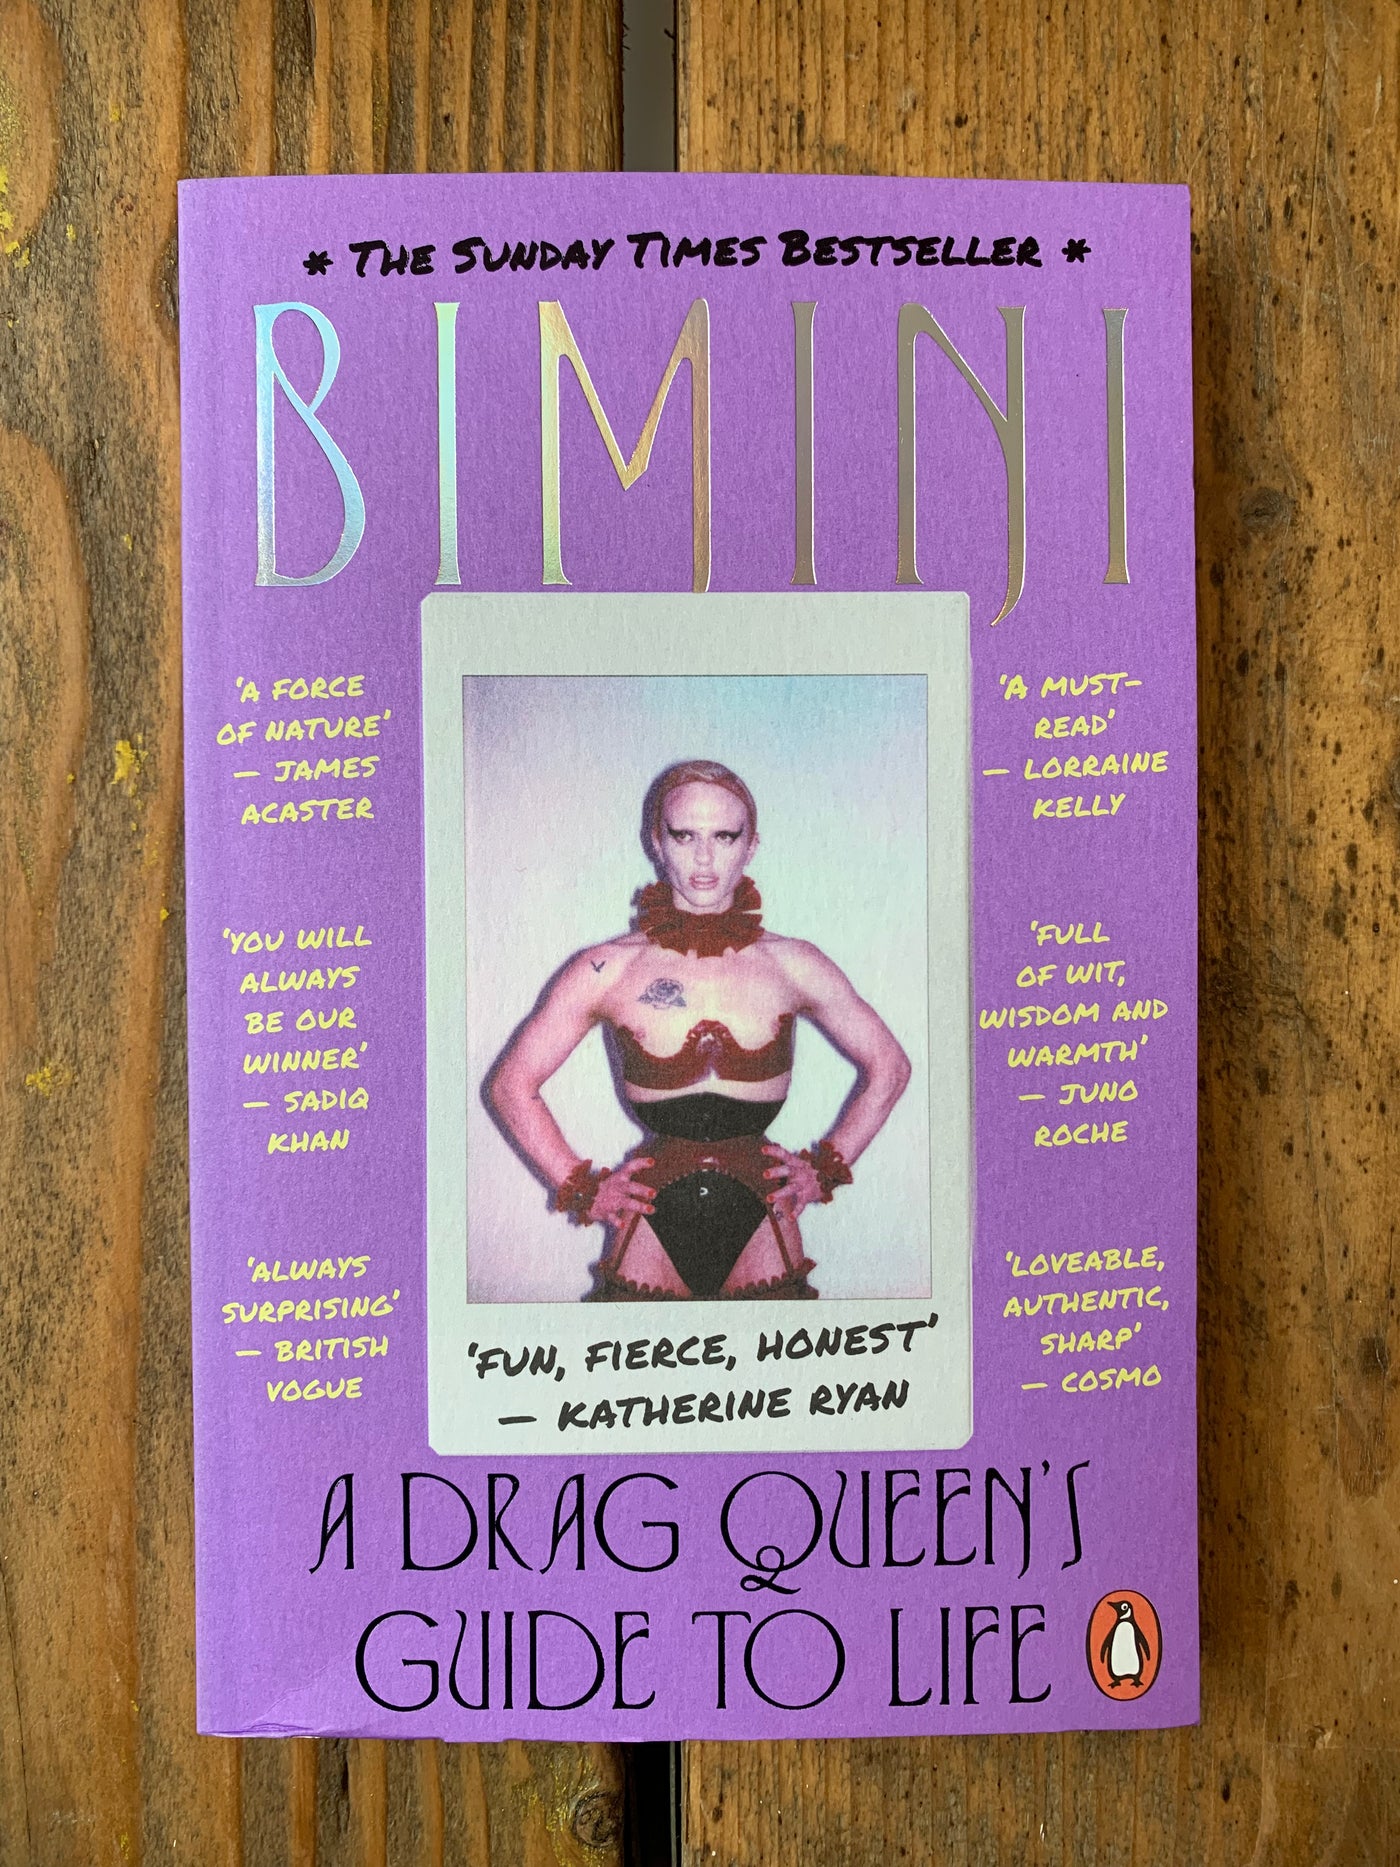 A Drag Queen's Guide to Life